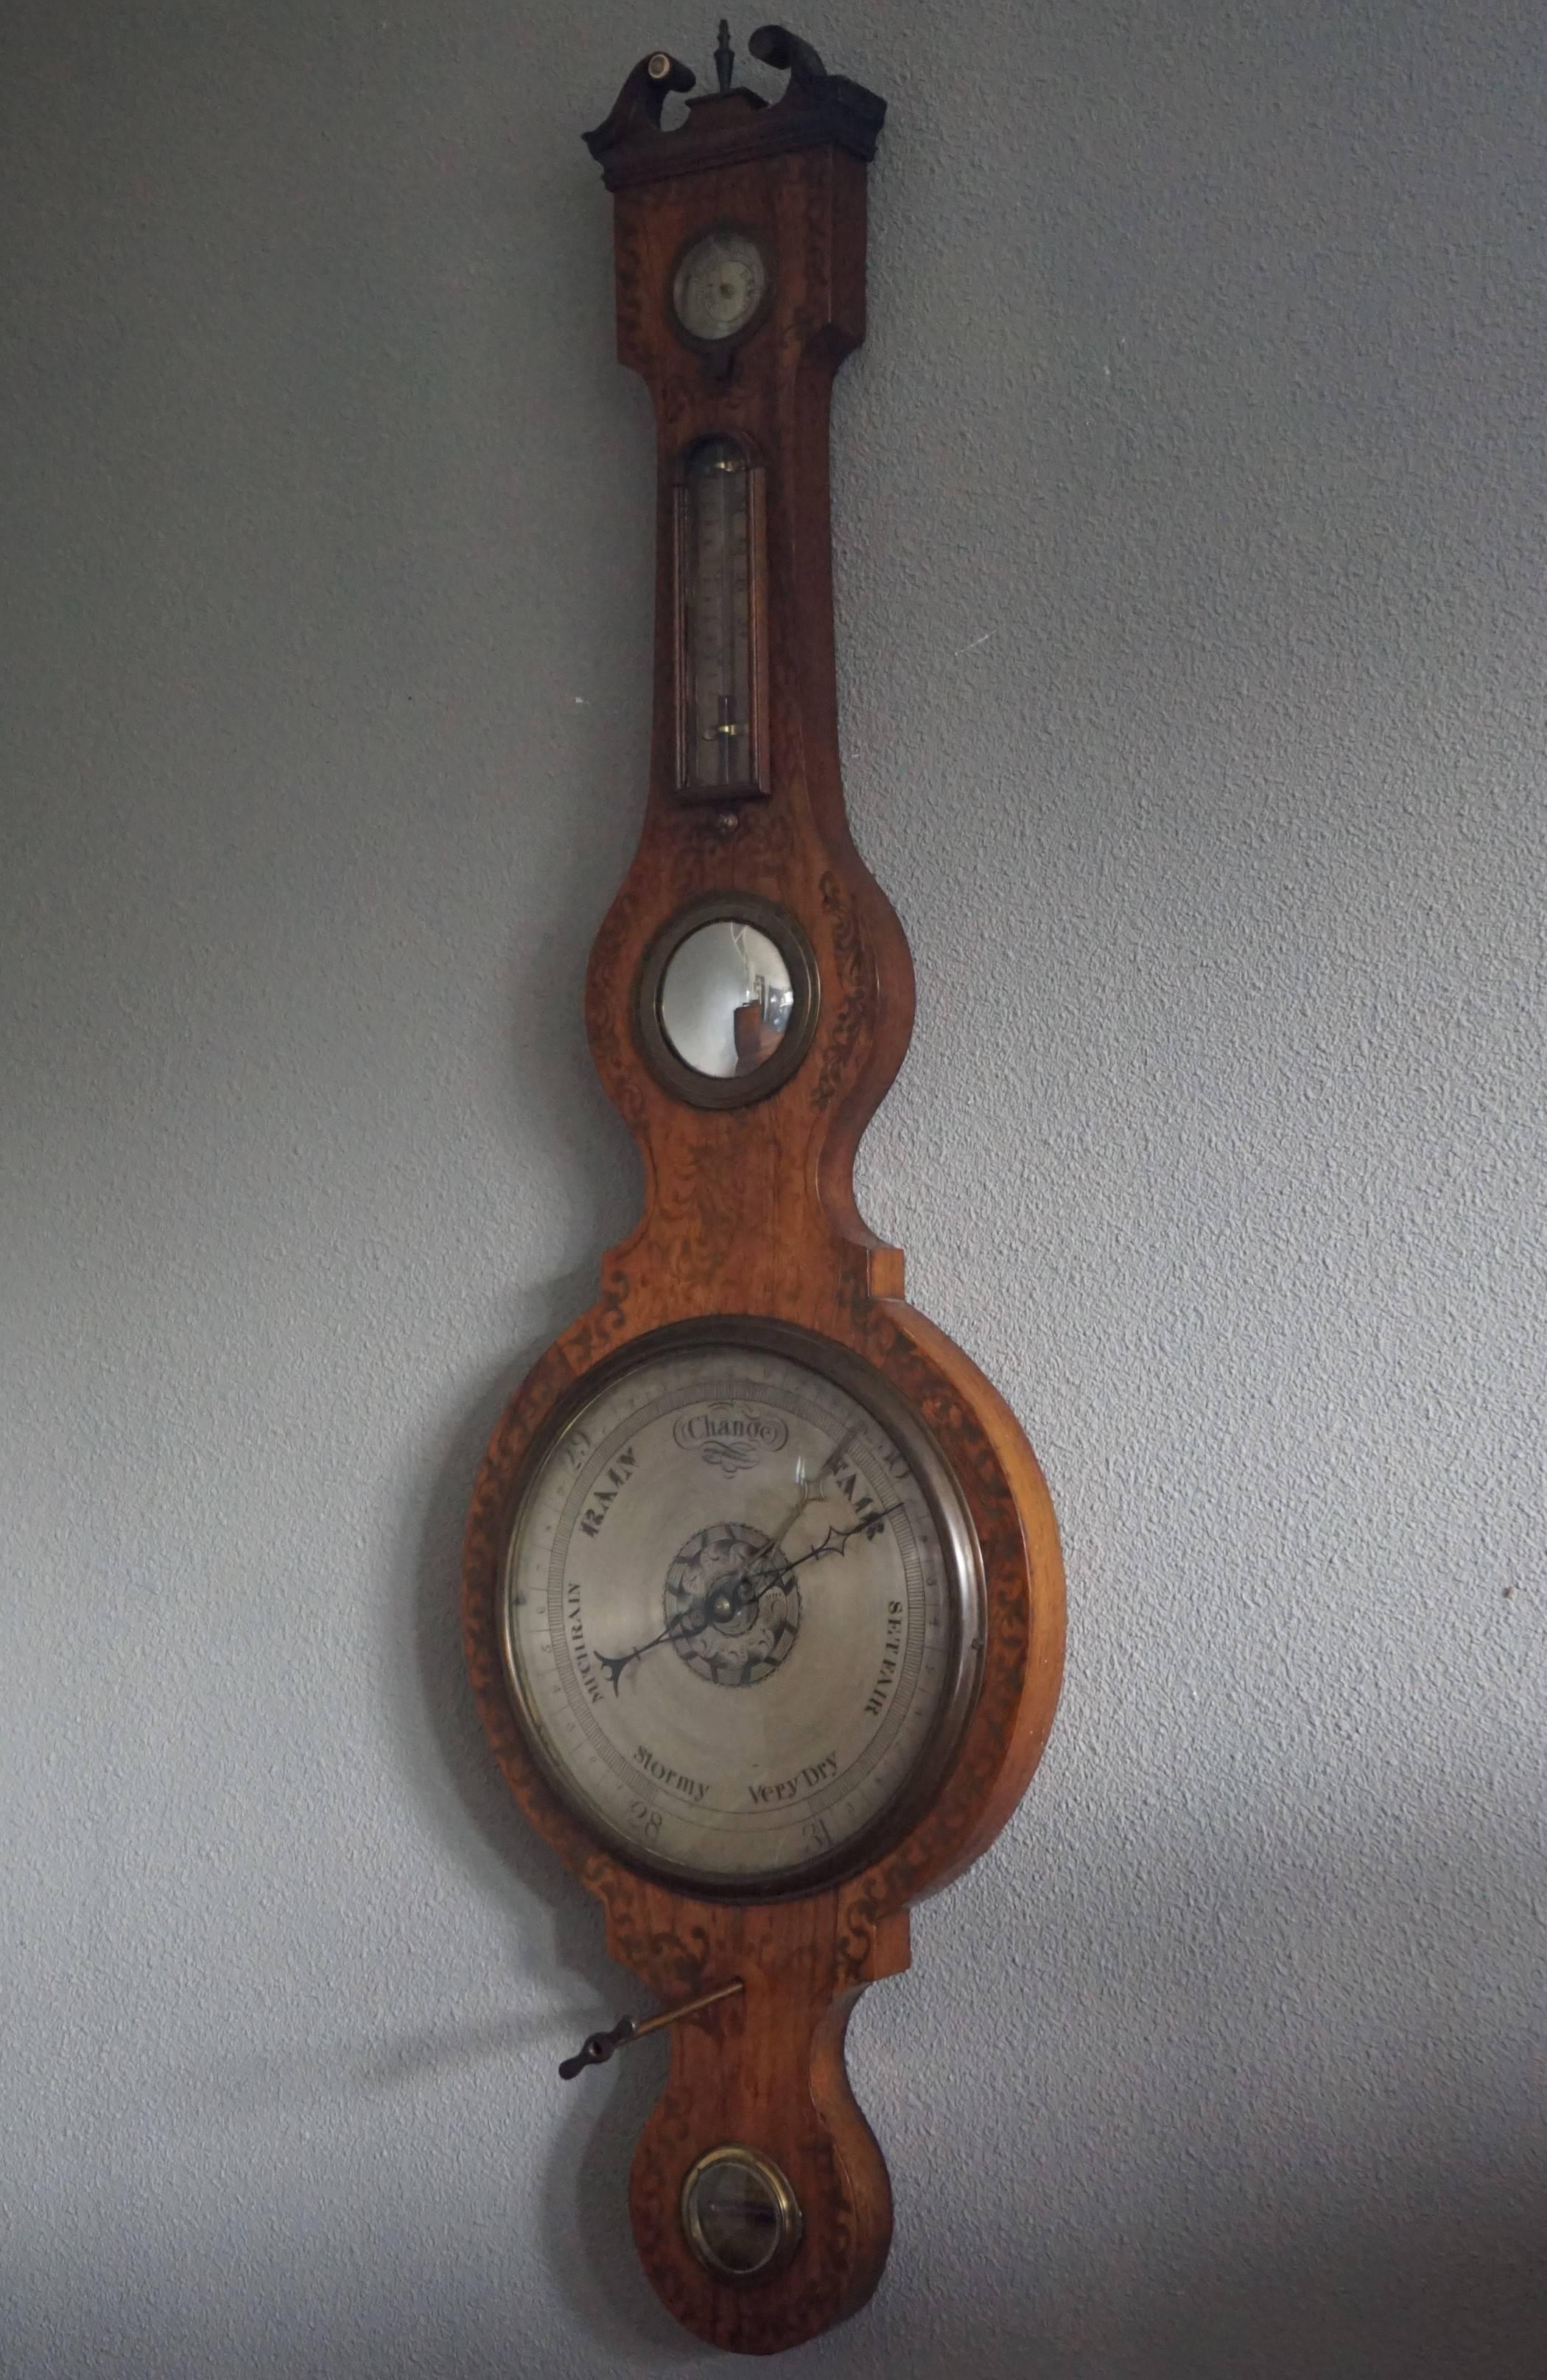 Rare size and impressive antique 'weather station'.

For the collectors of rare and impressive English country house antiques we also have this 200 year old barometer on offer. It comes with the original key for winding the mechanism, the original